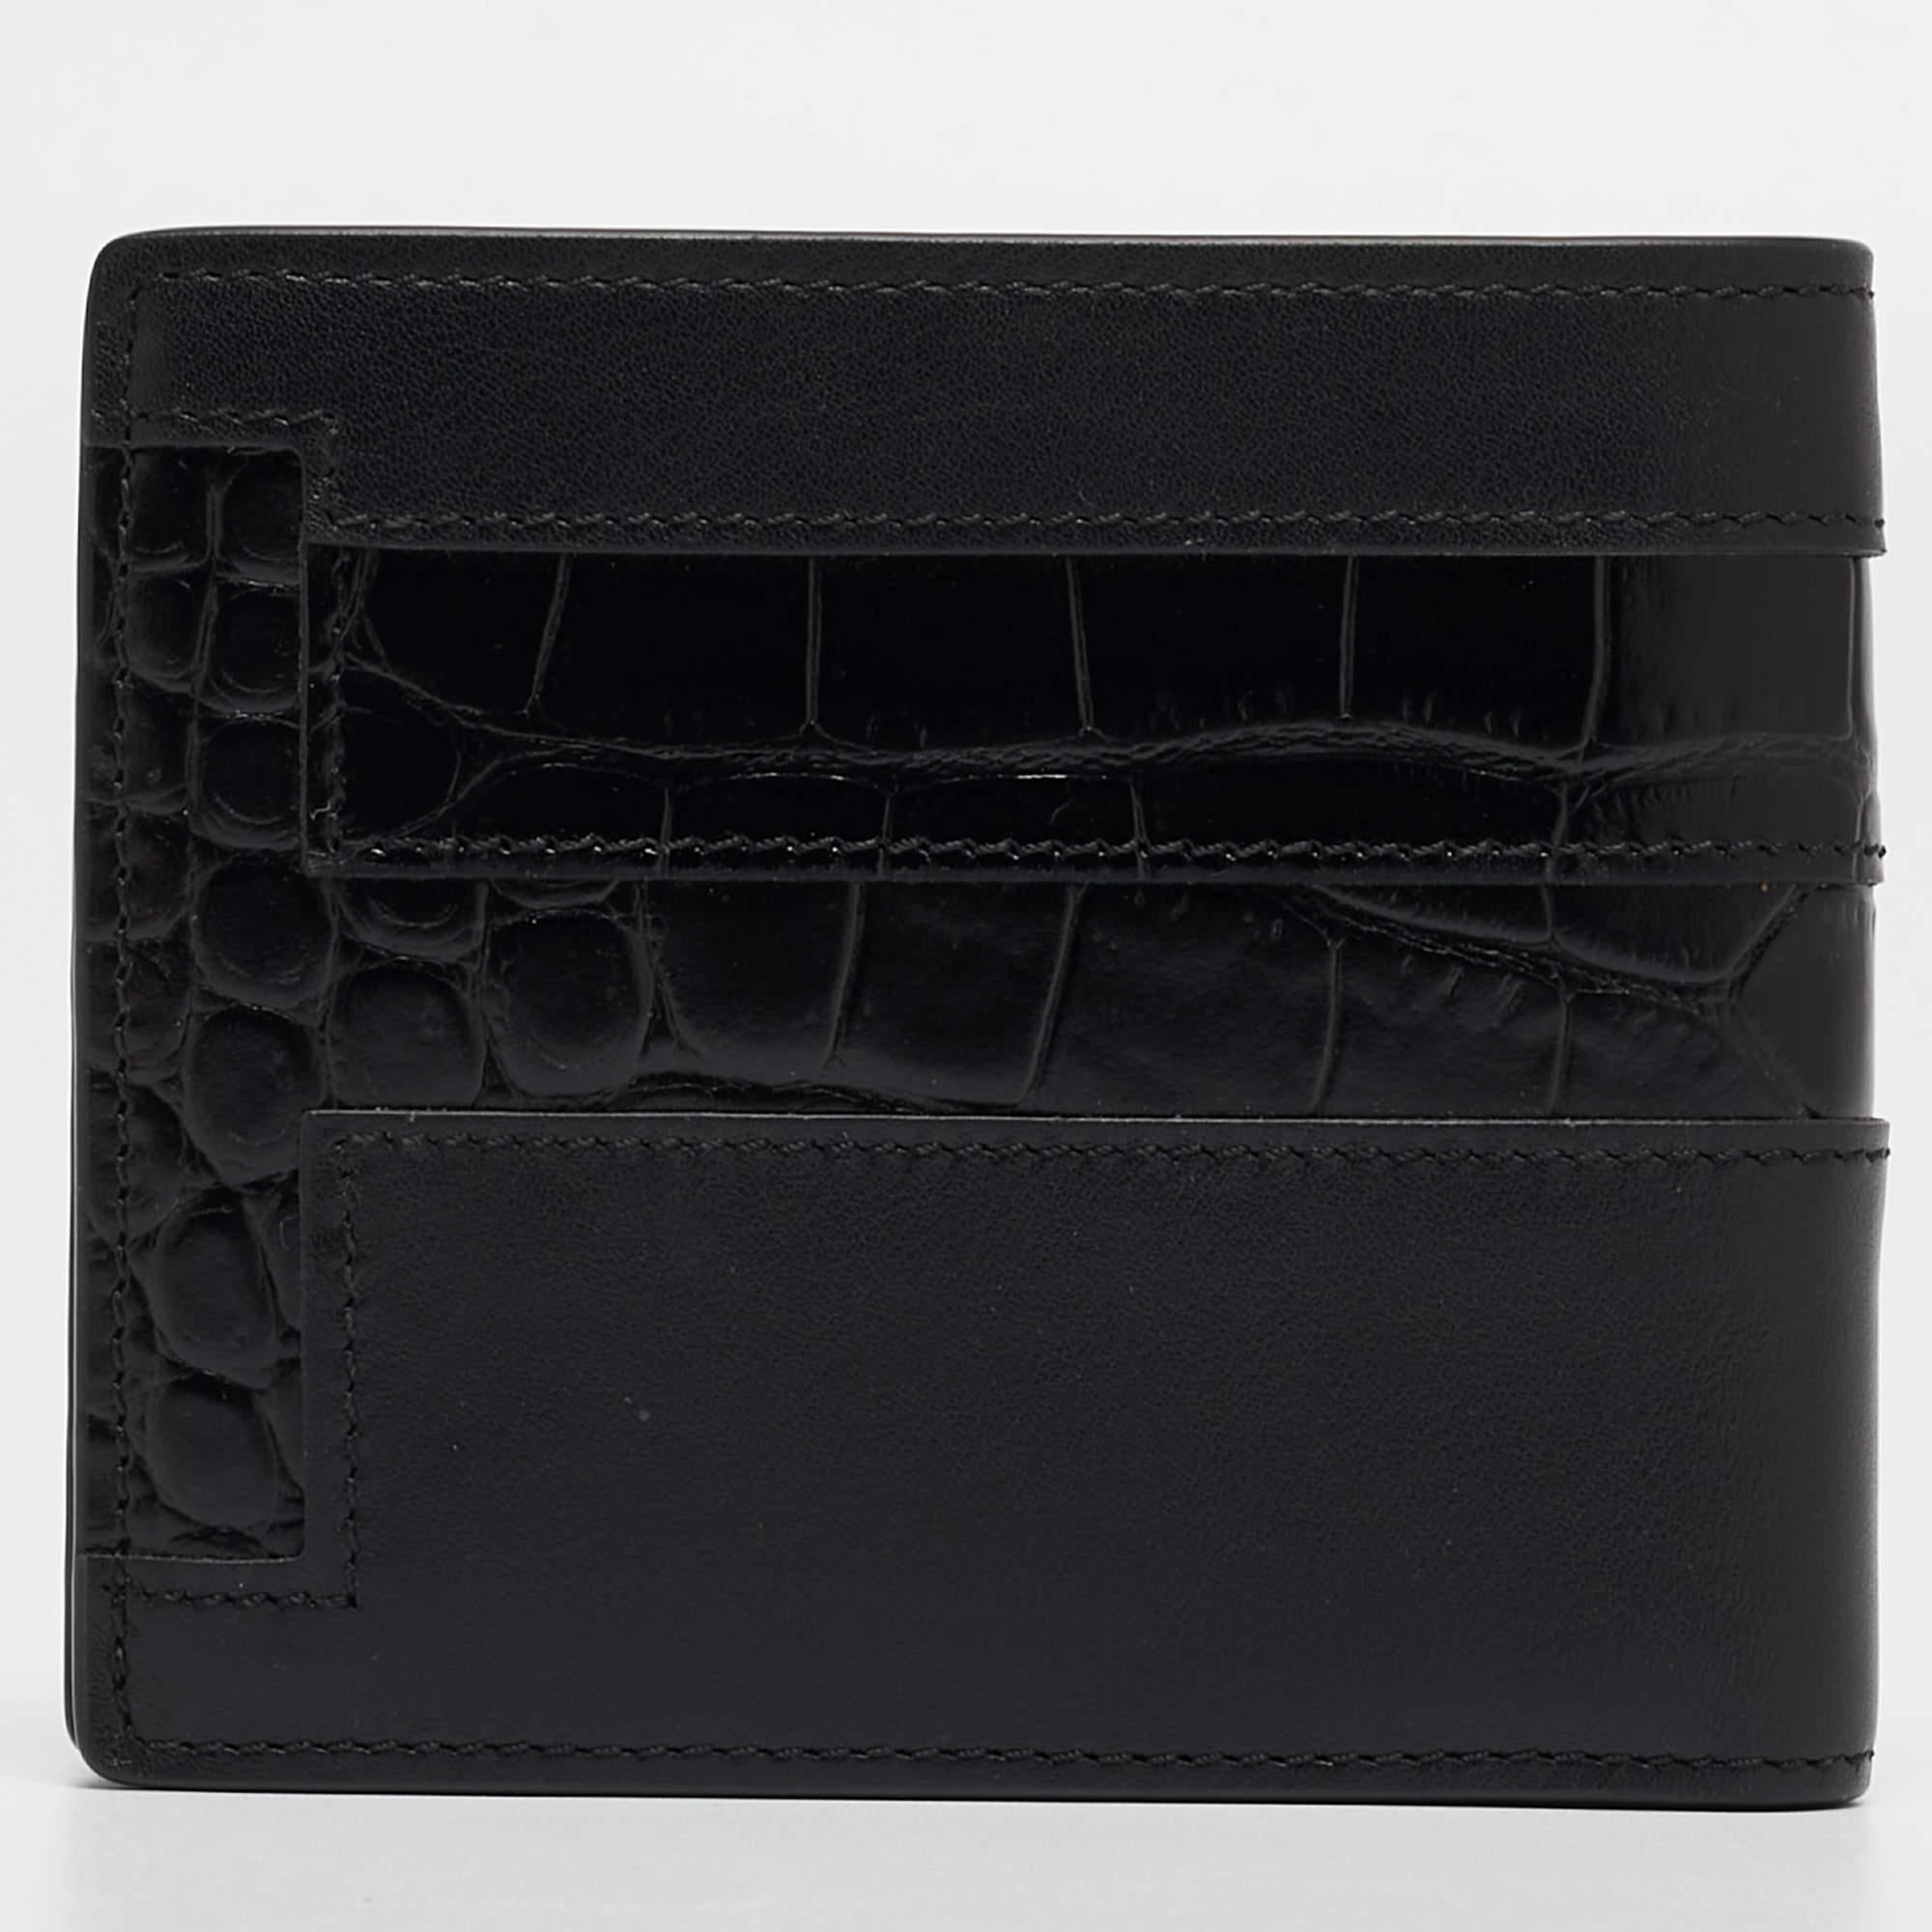 Compact and stylish, this wallet will be your favorite grab-and-go companion. Designed from quality materials, its interior is divided into different compartments to store your cards and cash perfectly.

Includes: Original Box, Original Dust Cloth,